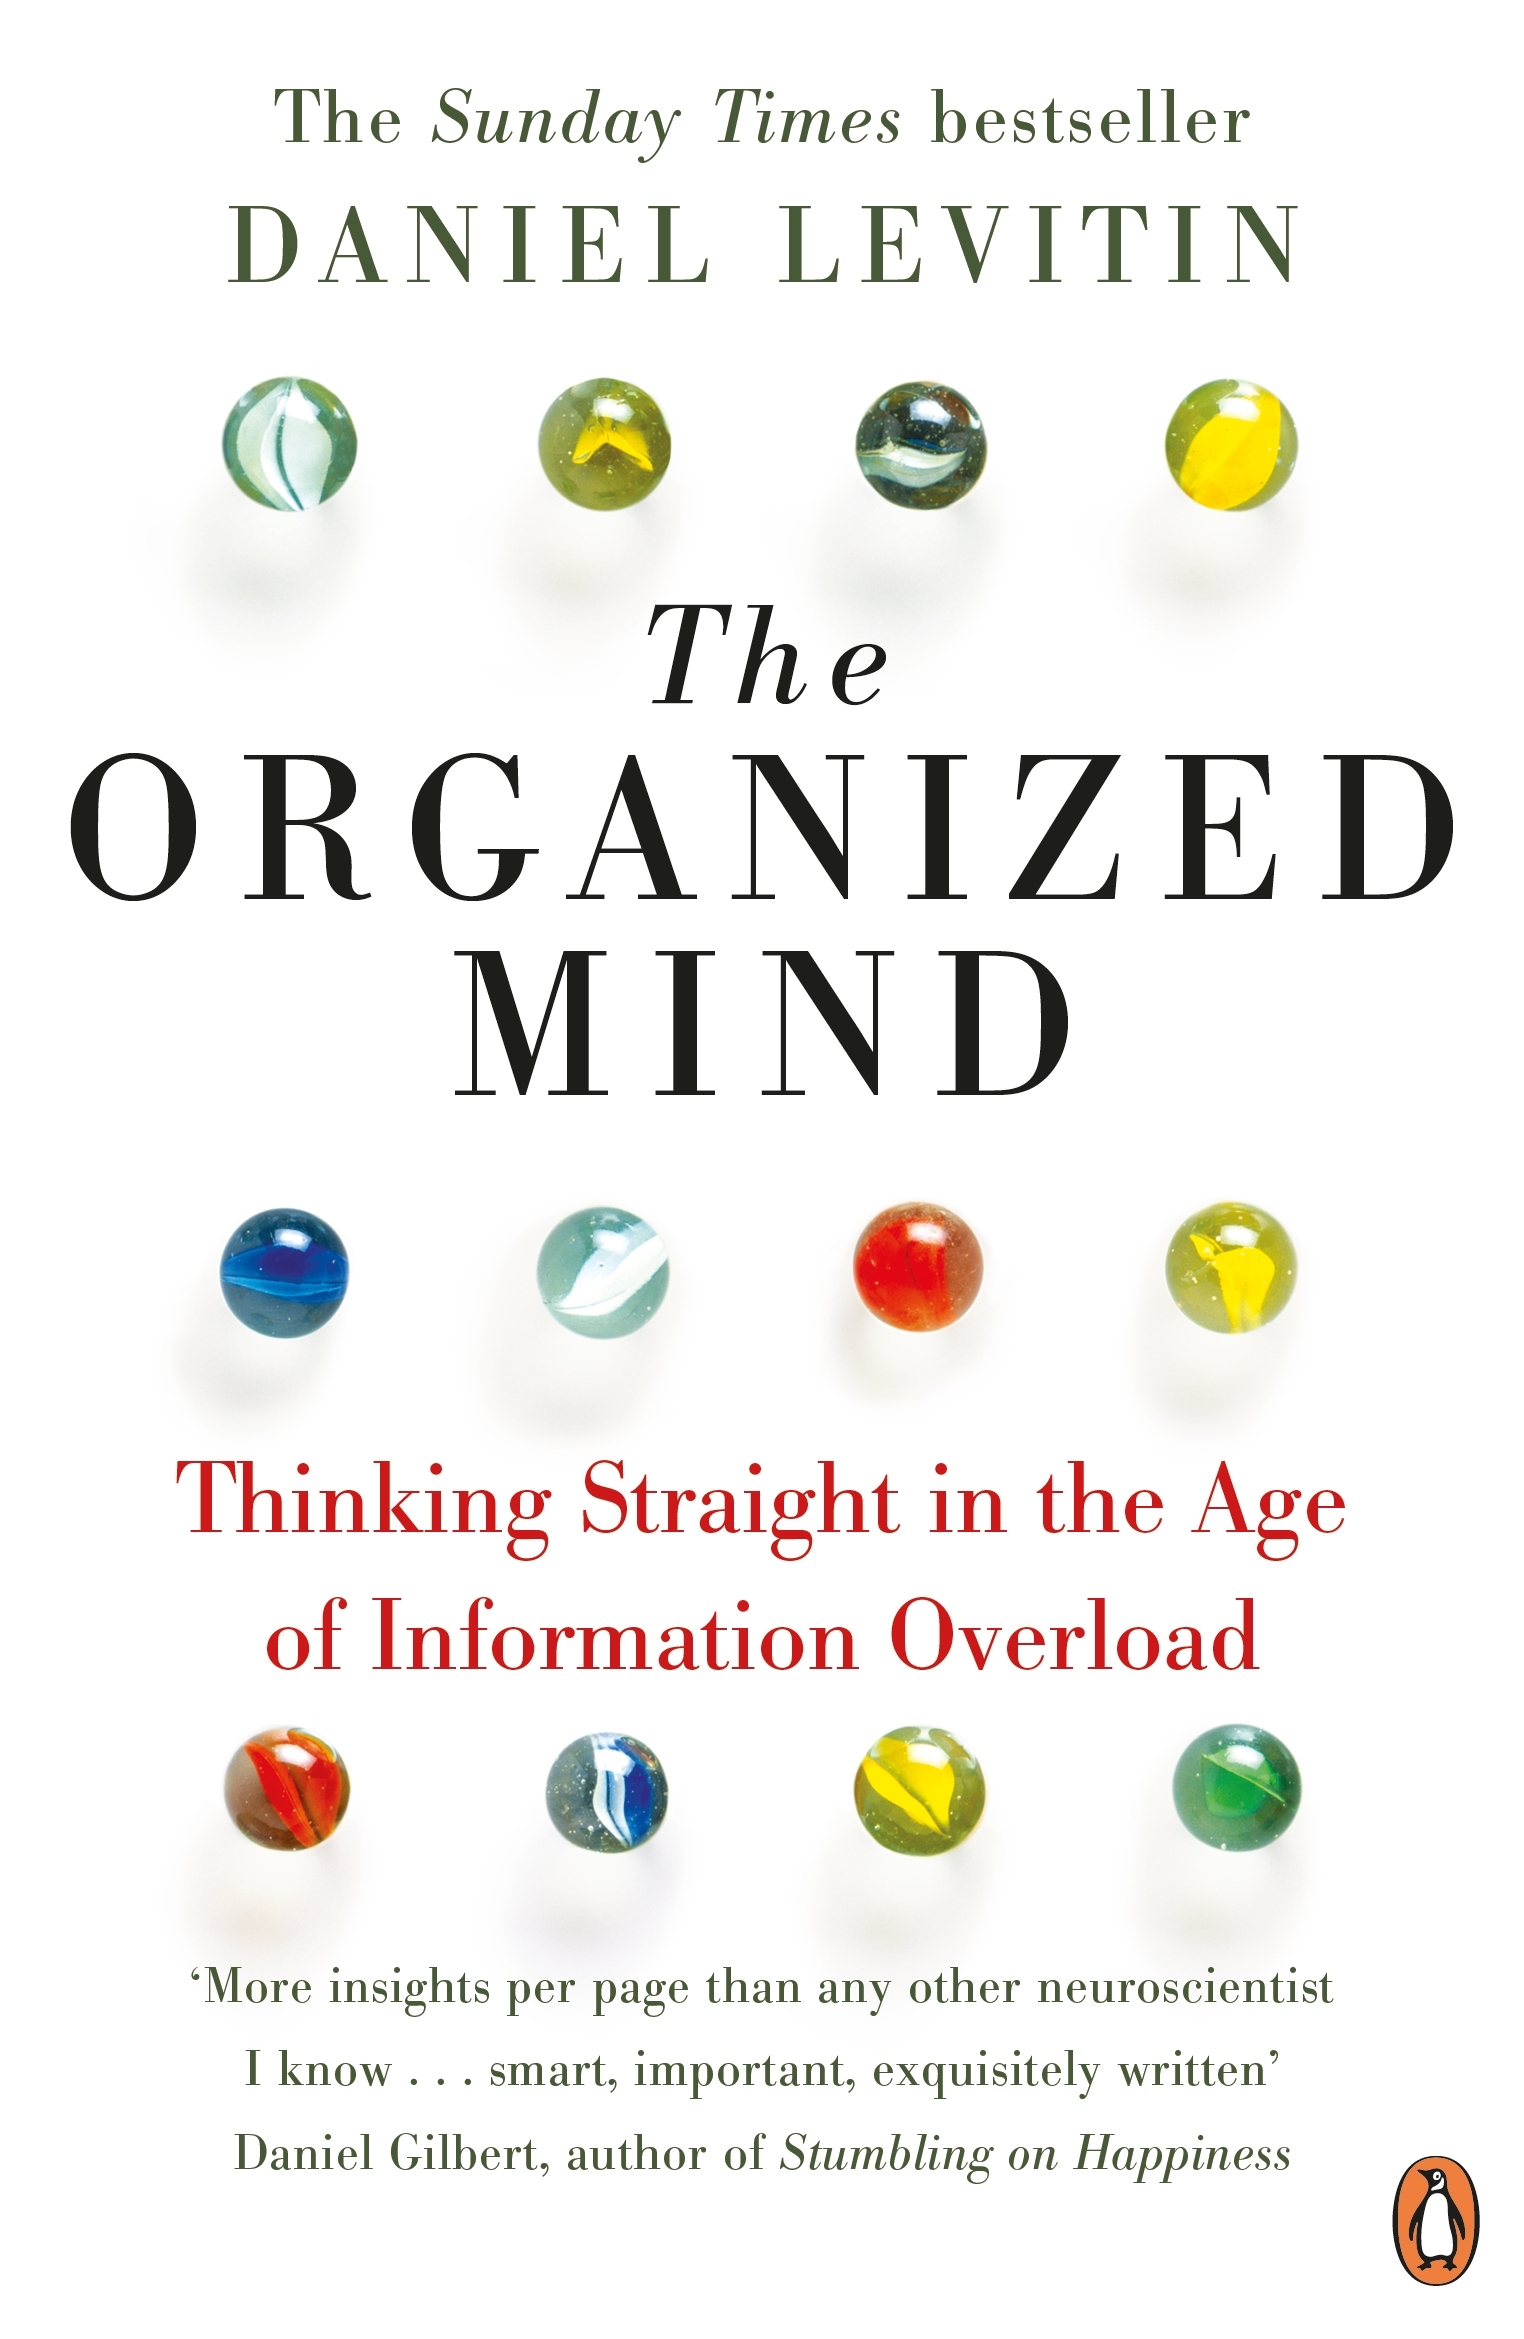 The Organized Mind: Thinking Straight in the Age of Information Overload - Daniel Levitin